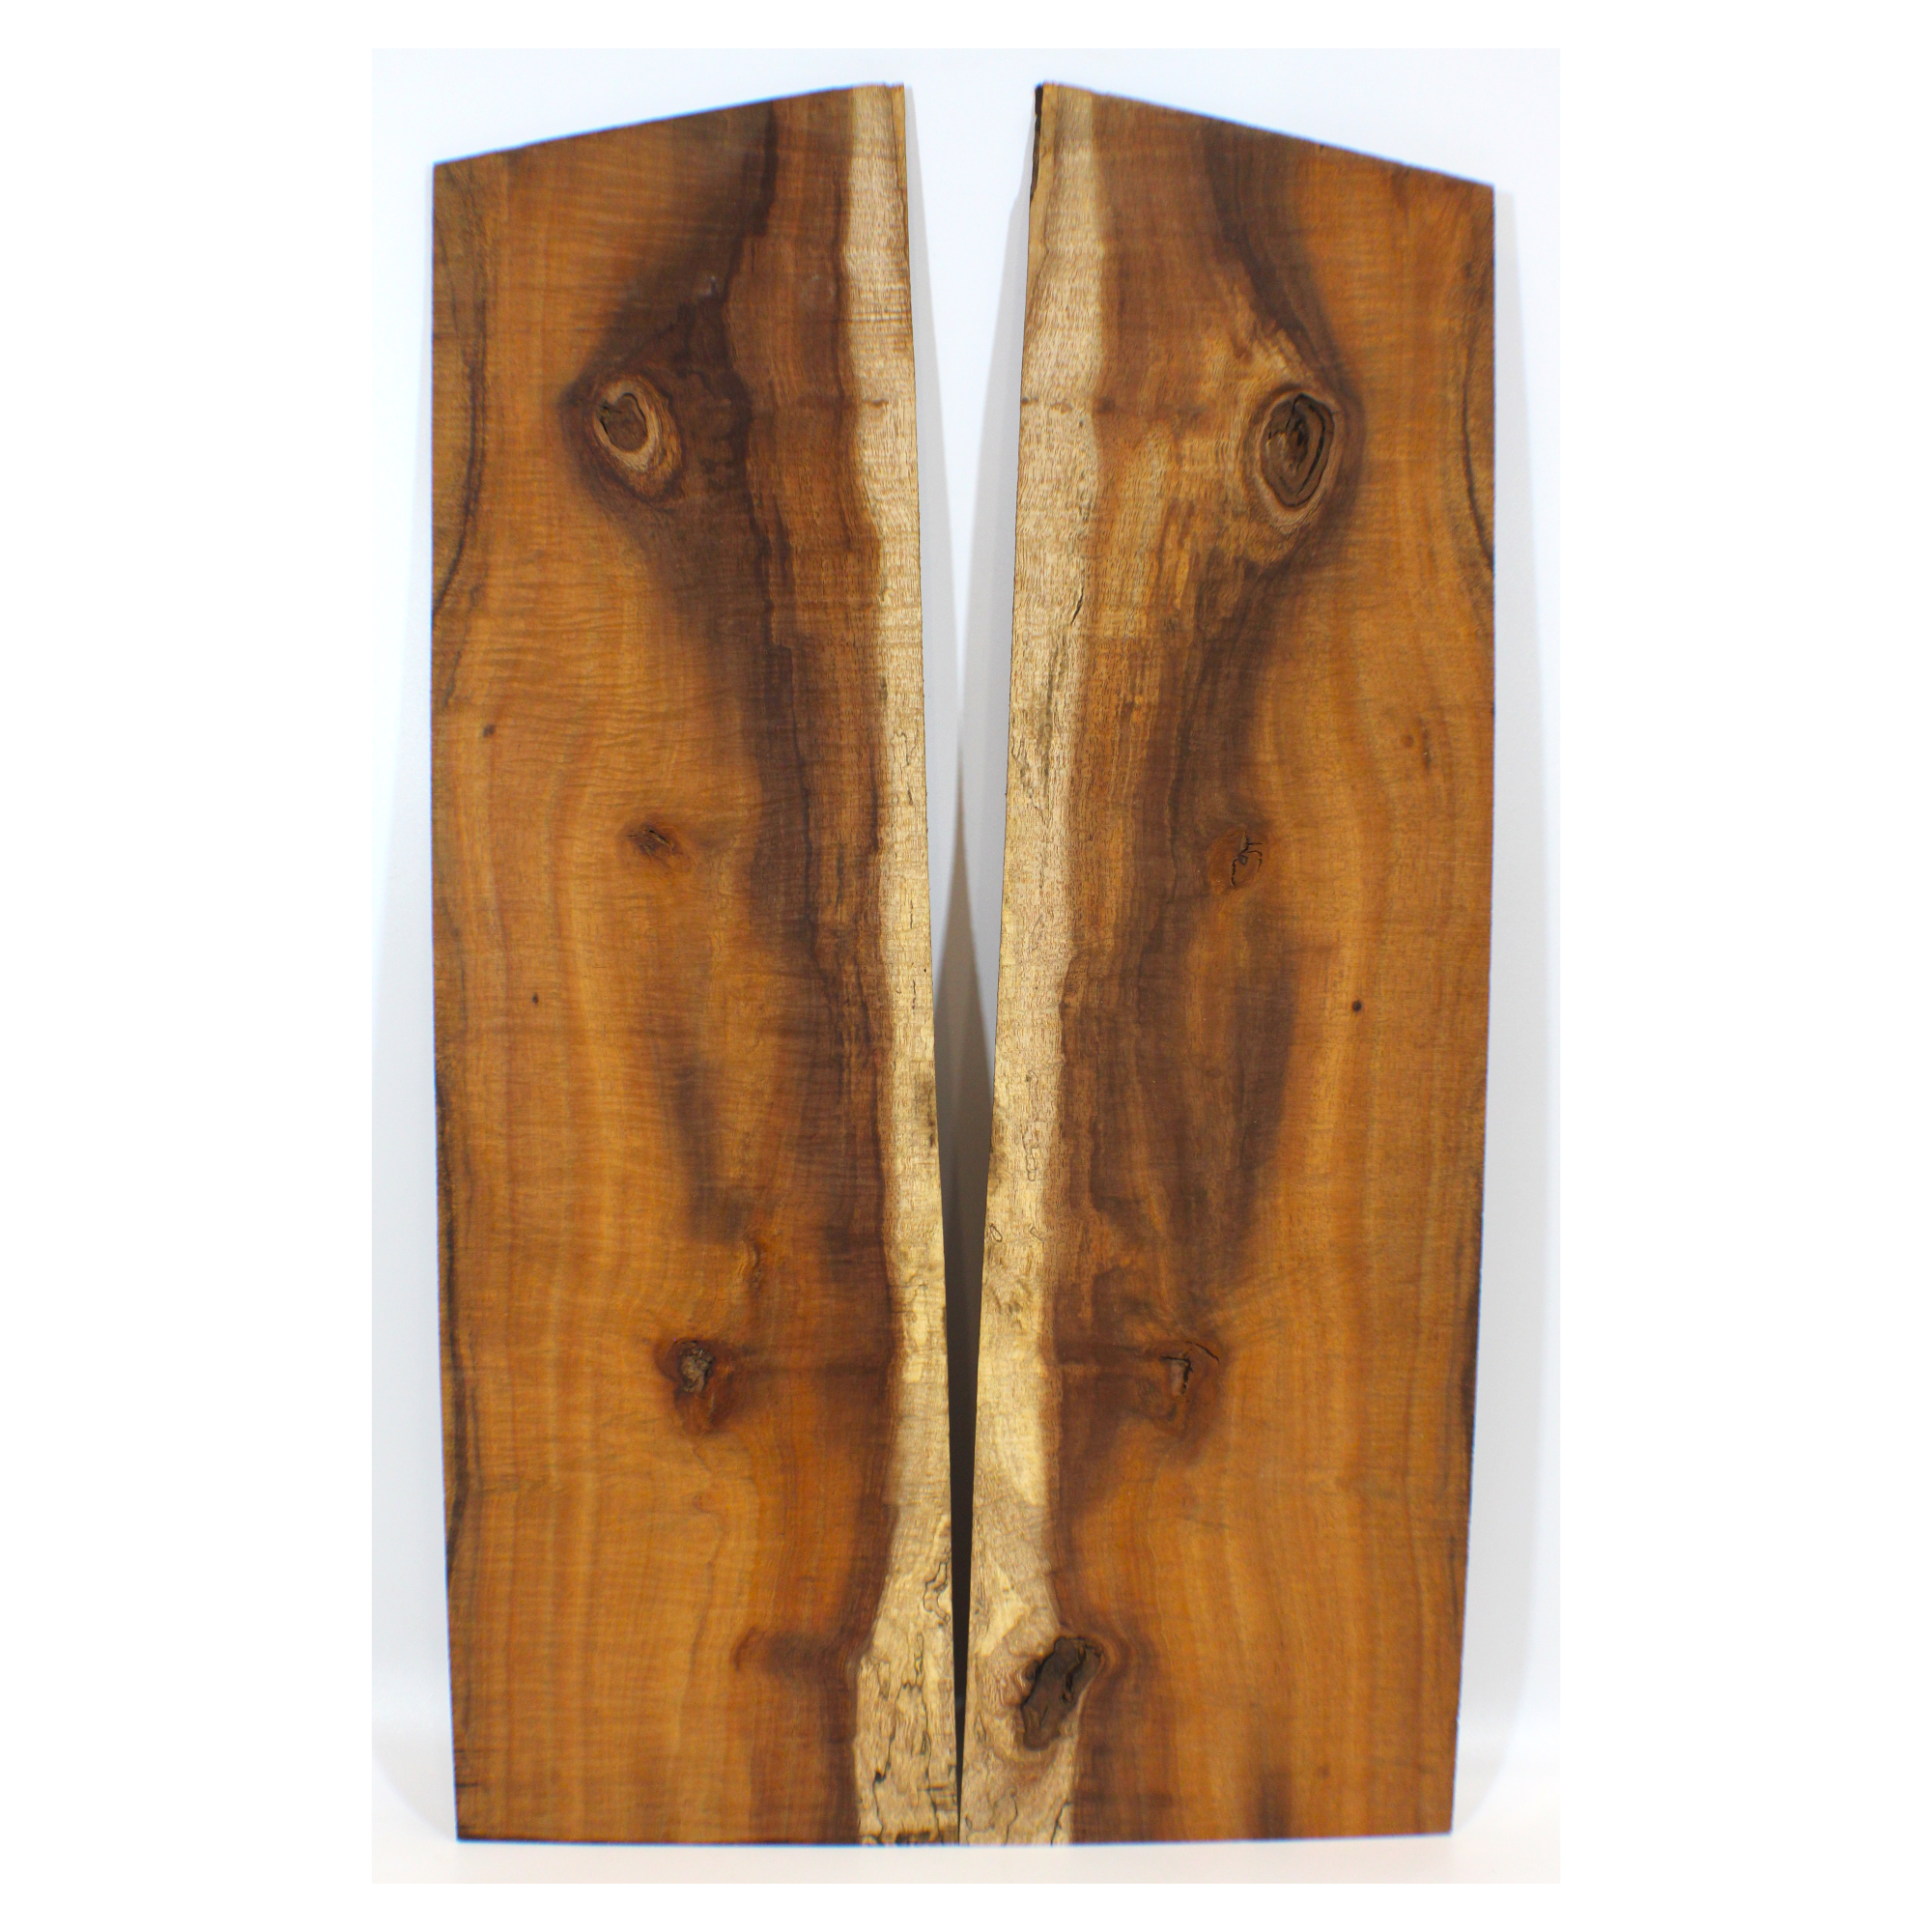 2-piece curly koa book-matched set.  This set is well quartered 5A curl with knots and sap line.  Dimensions: Thickness (each piece): .125